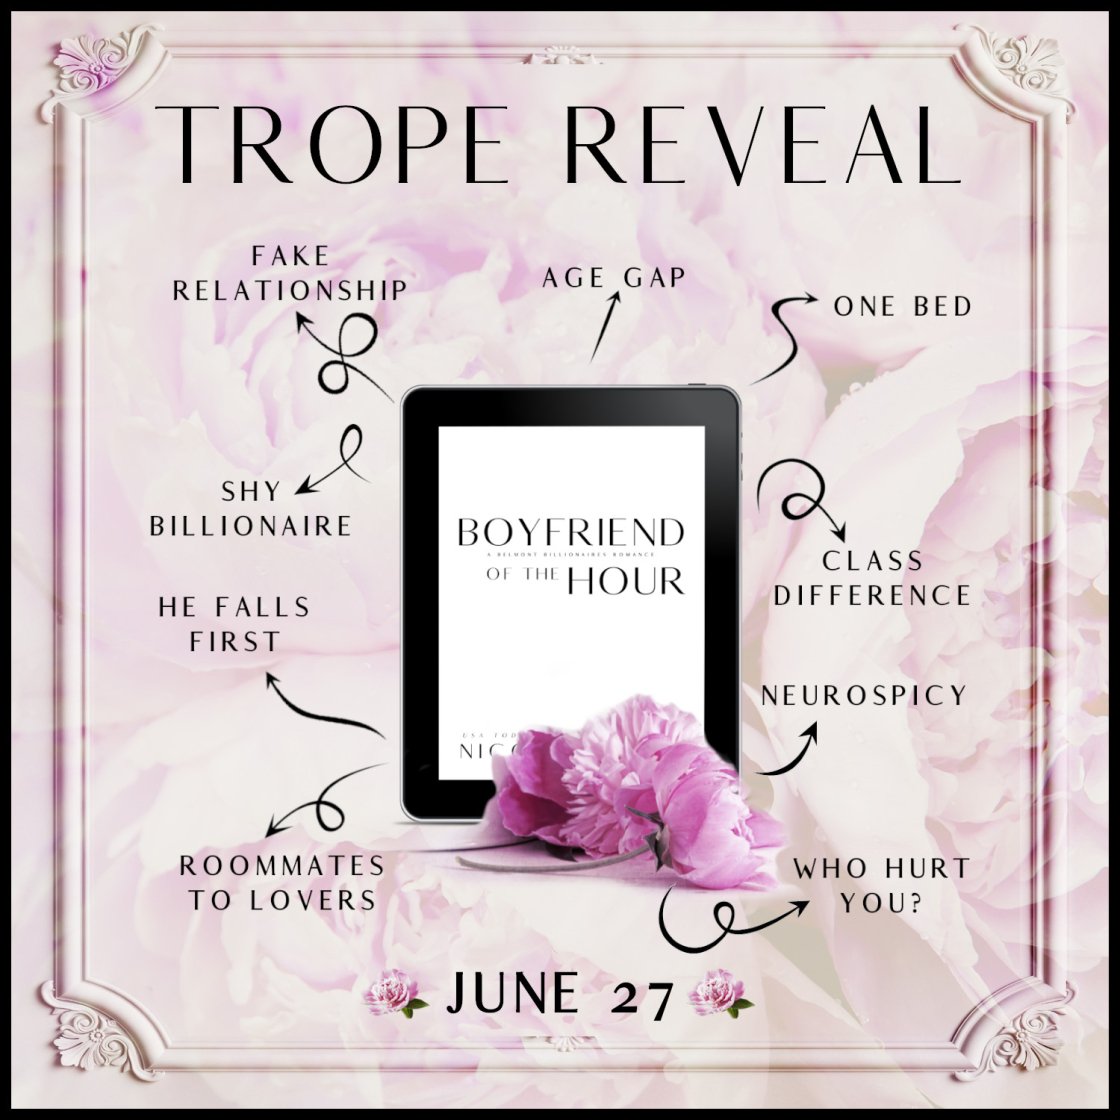 🔥🔥TROPE REVEAL🔥🔥 BOYFRIEND OF THE HOUR by @nfrenchauthor releasing on June 27th! facebook.com/share/p/hExZo1… #comingsoon #nicolefrench #tropes #lovereading #bookcommunity #reading #bookish #romancenovels #booknerds #bookishlove #mustread #ebooks  @WildfireMarket1